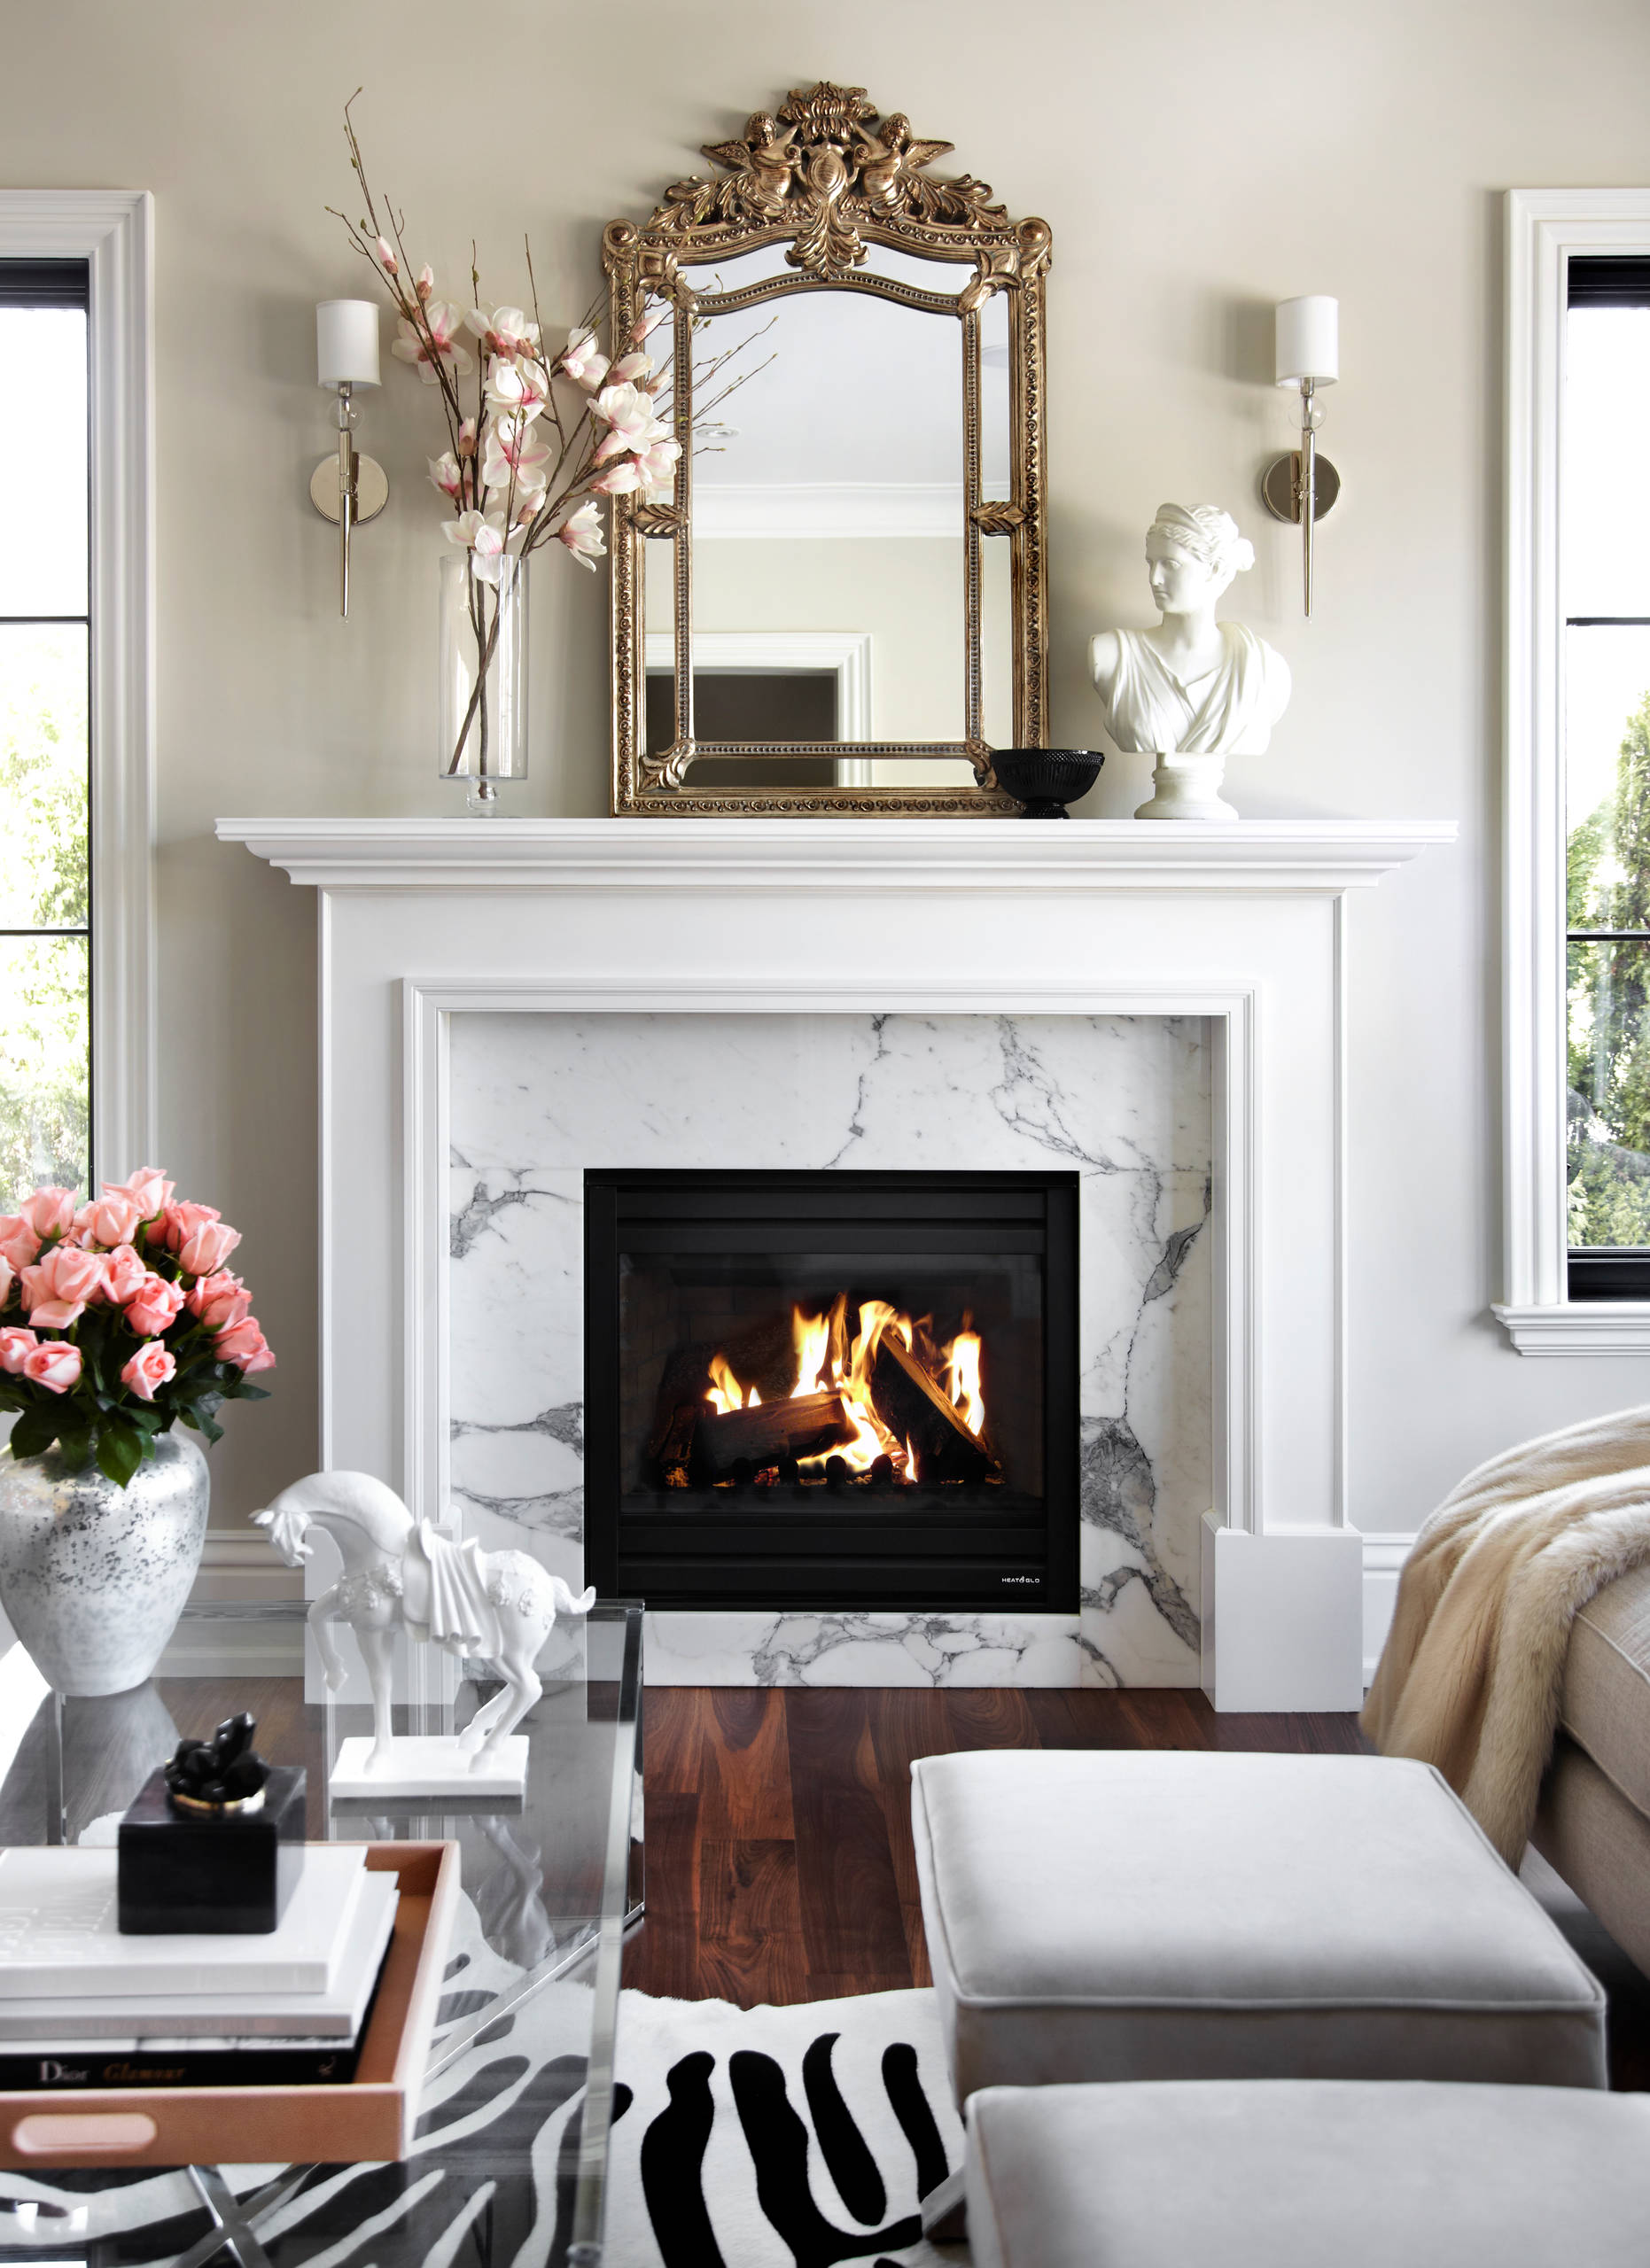 How to get a Stylish Winter Living Room with Fireplaces